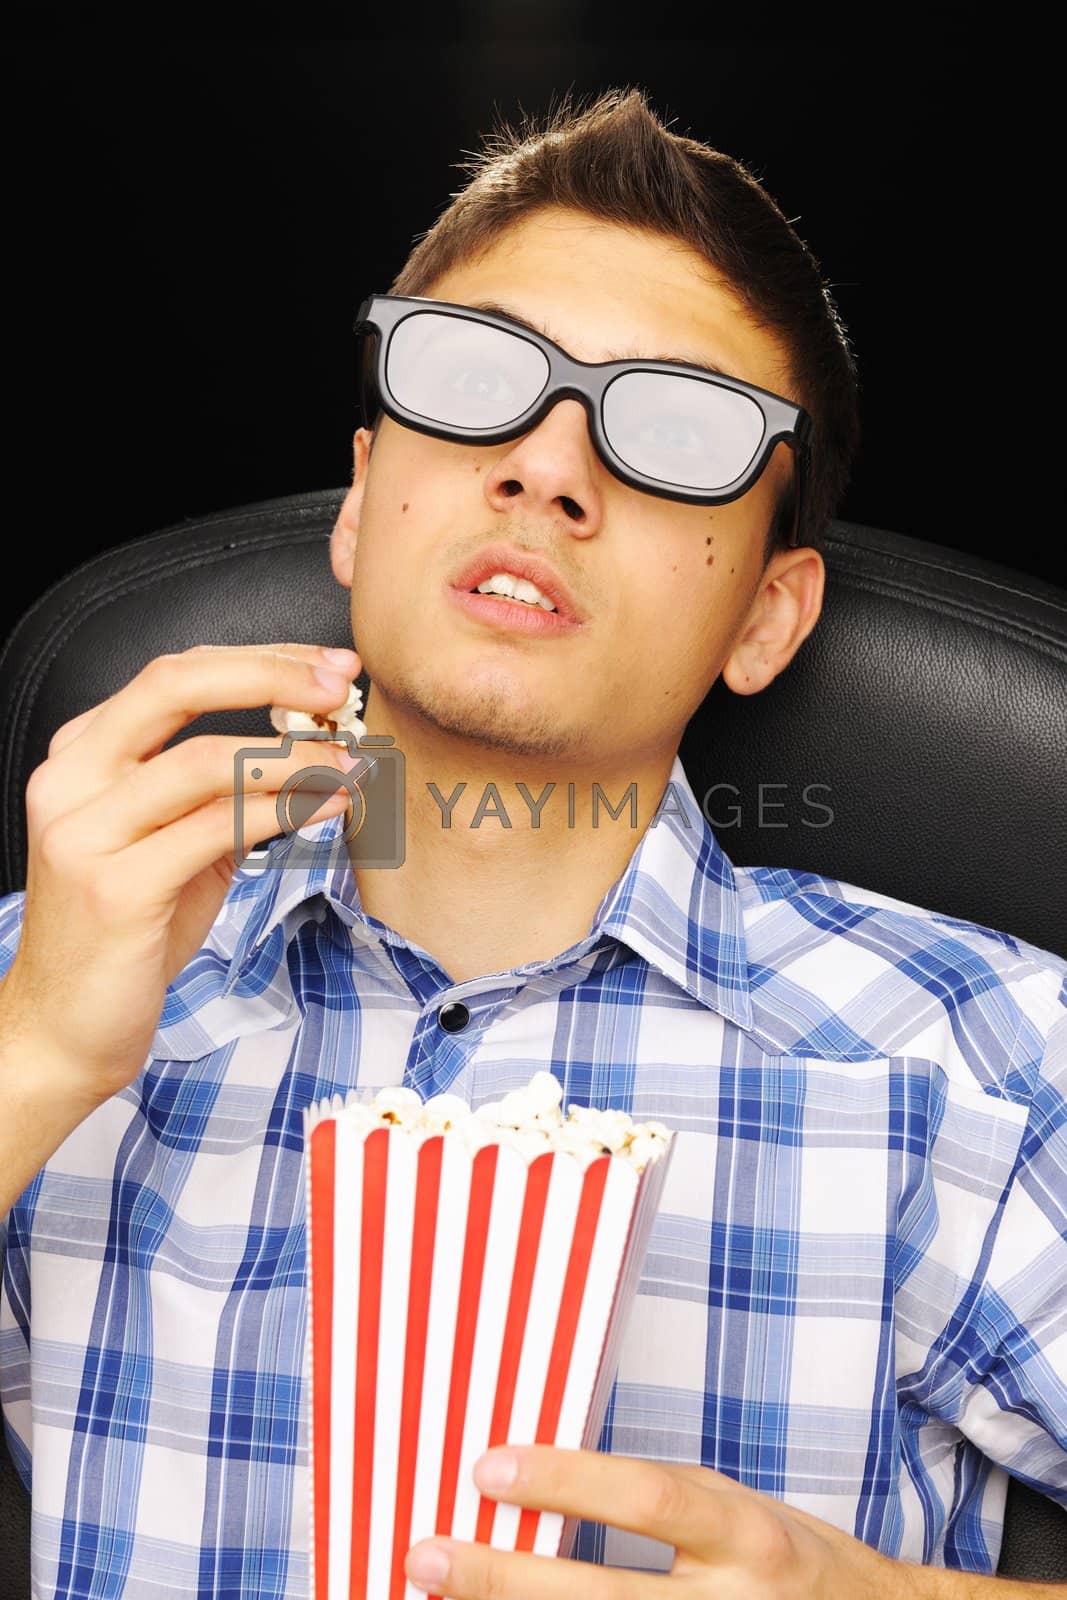 Royalty free image of Young man at cinema by haveseen